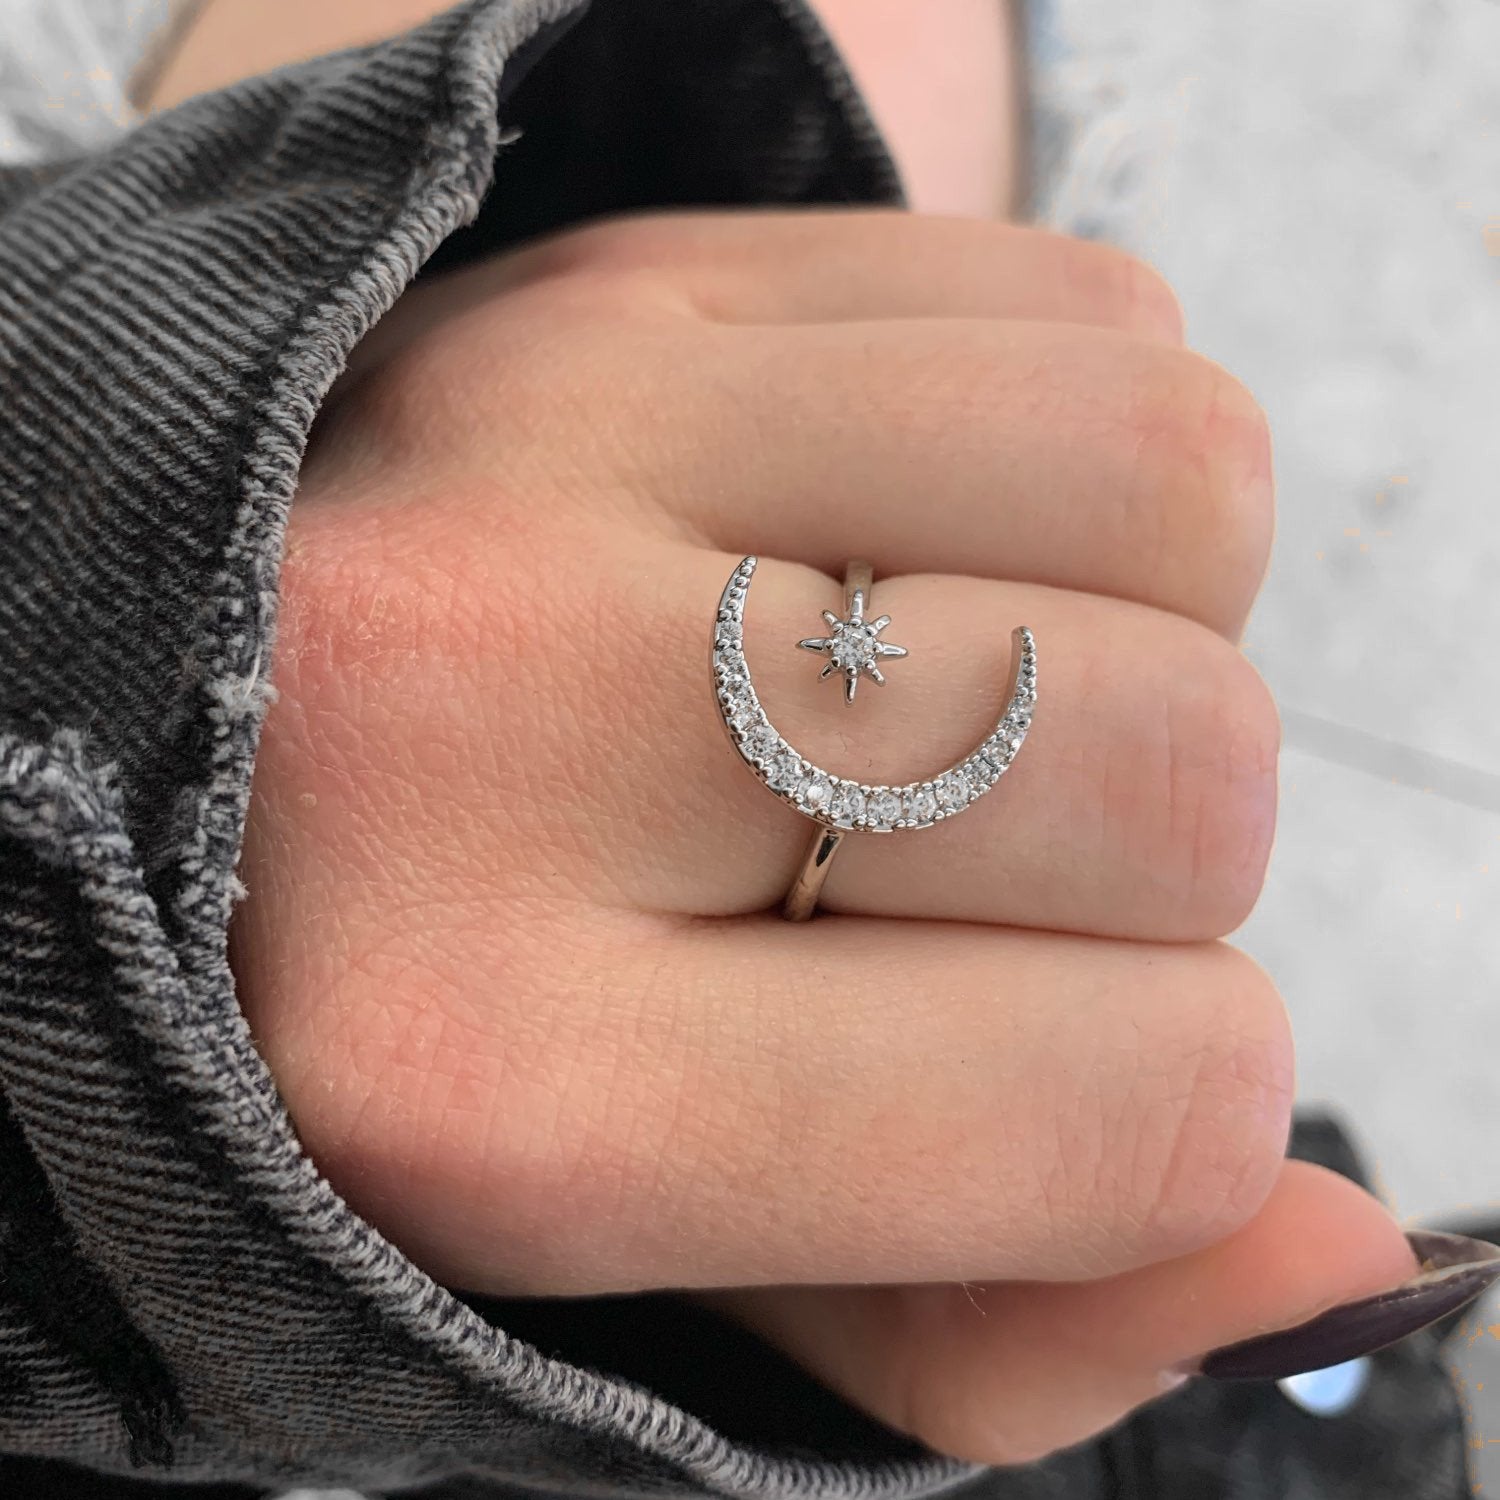 Star Crescent Moon Ring on a woman's finger.